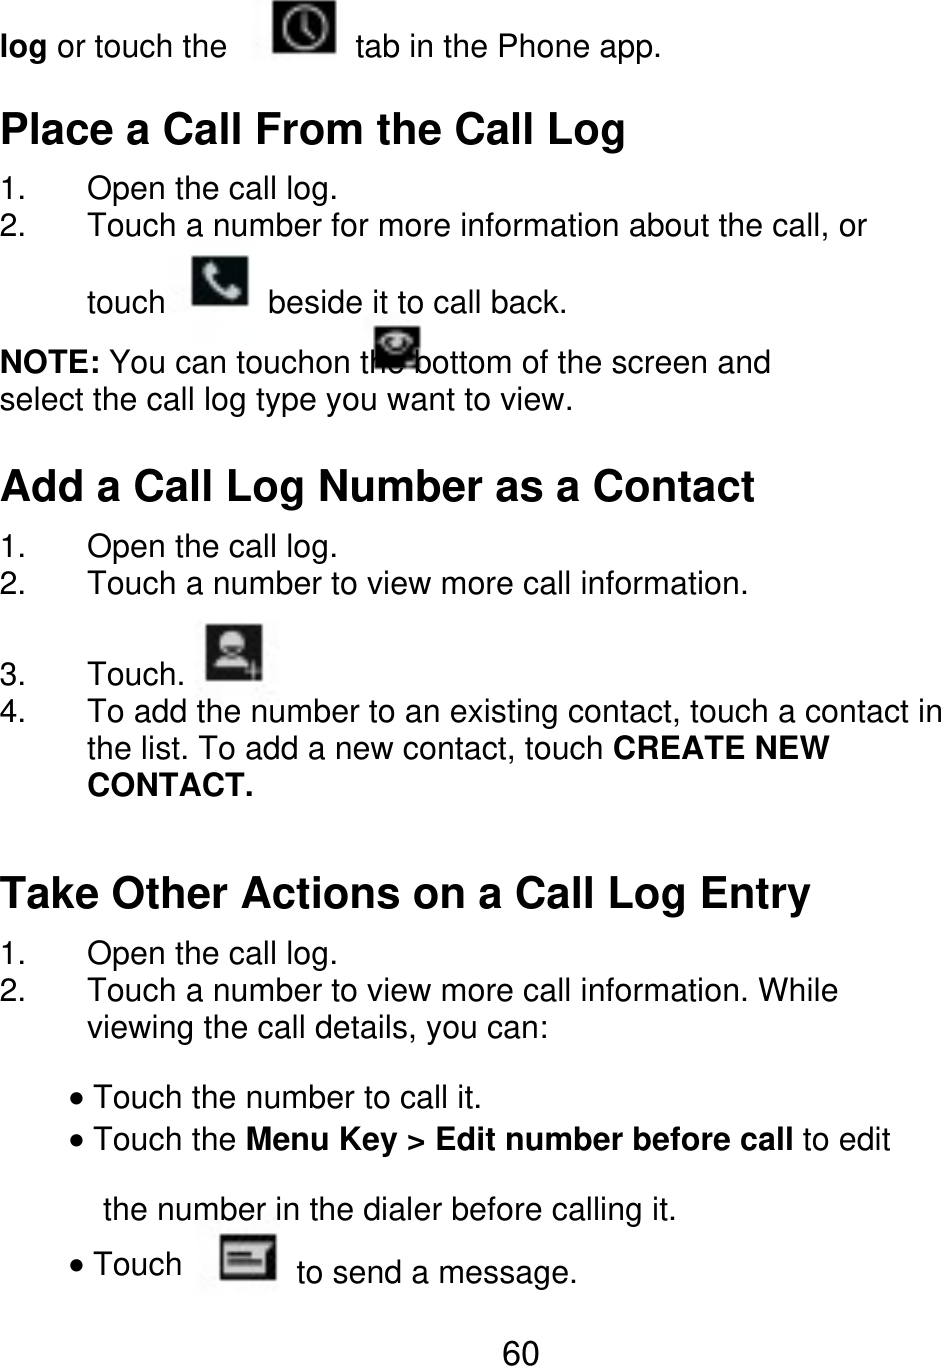 log or touch the tab in the Phone app. Place a Call From the Call Log 1. 2. Open the call log. Touch a number for more information about the call, or touch beside it to call back. NOTE: You can touchon the bottom of the screen and select the call log type you want to view. Add a Call Log Number as a Contact 1. 2. 3. 4. Open the call log. Touch a number to view more call information. Touch. To add the number to an existing contact, touch a contact in the list. To add a new contact, touch CREATE NEW CONTACT. Take Other Actions on a Call Log Entry 1. 2. Open the call log. Touch a number to view more call information. While viewing the call details, you can: Touch the number to call it. Touch the Menu Key &gt; Edit number before call to edit the number in the dialer before calling it. Touch to send a message. 60 